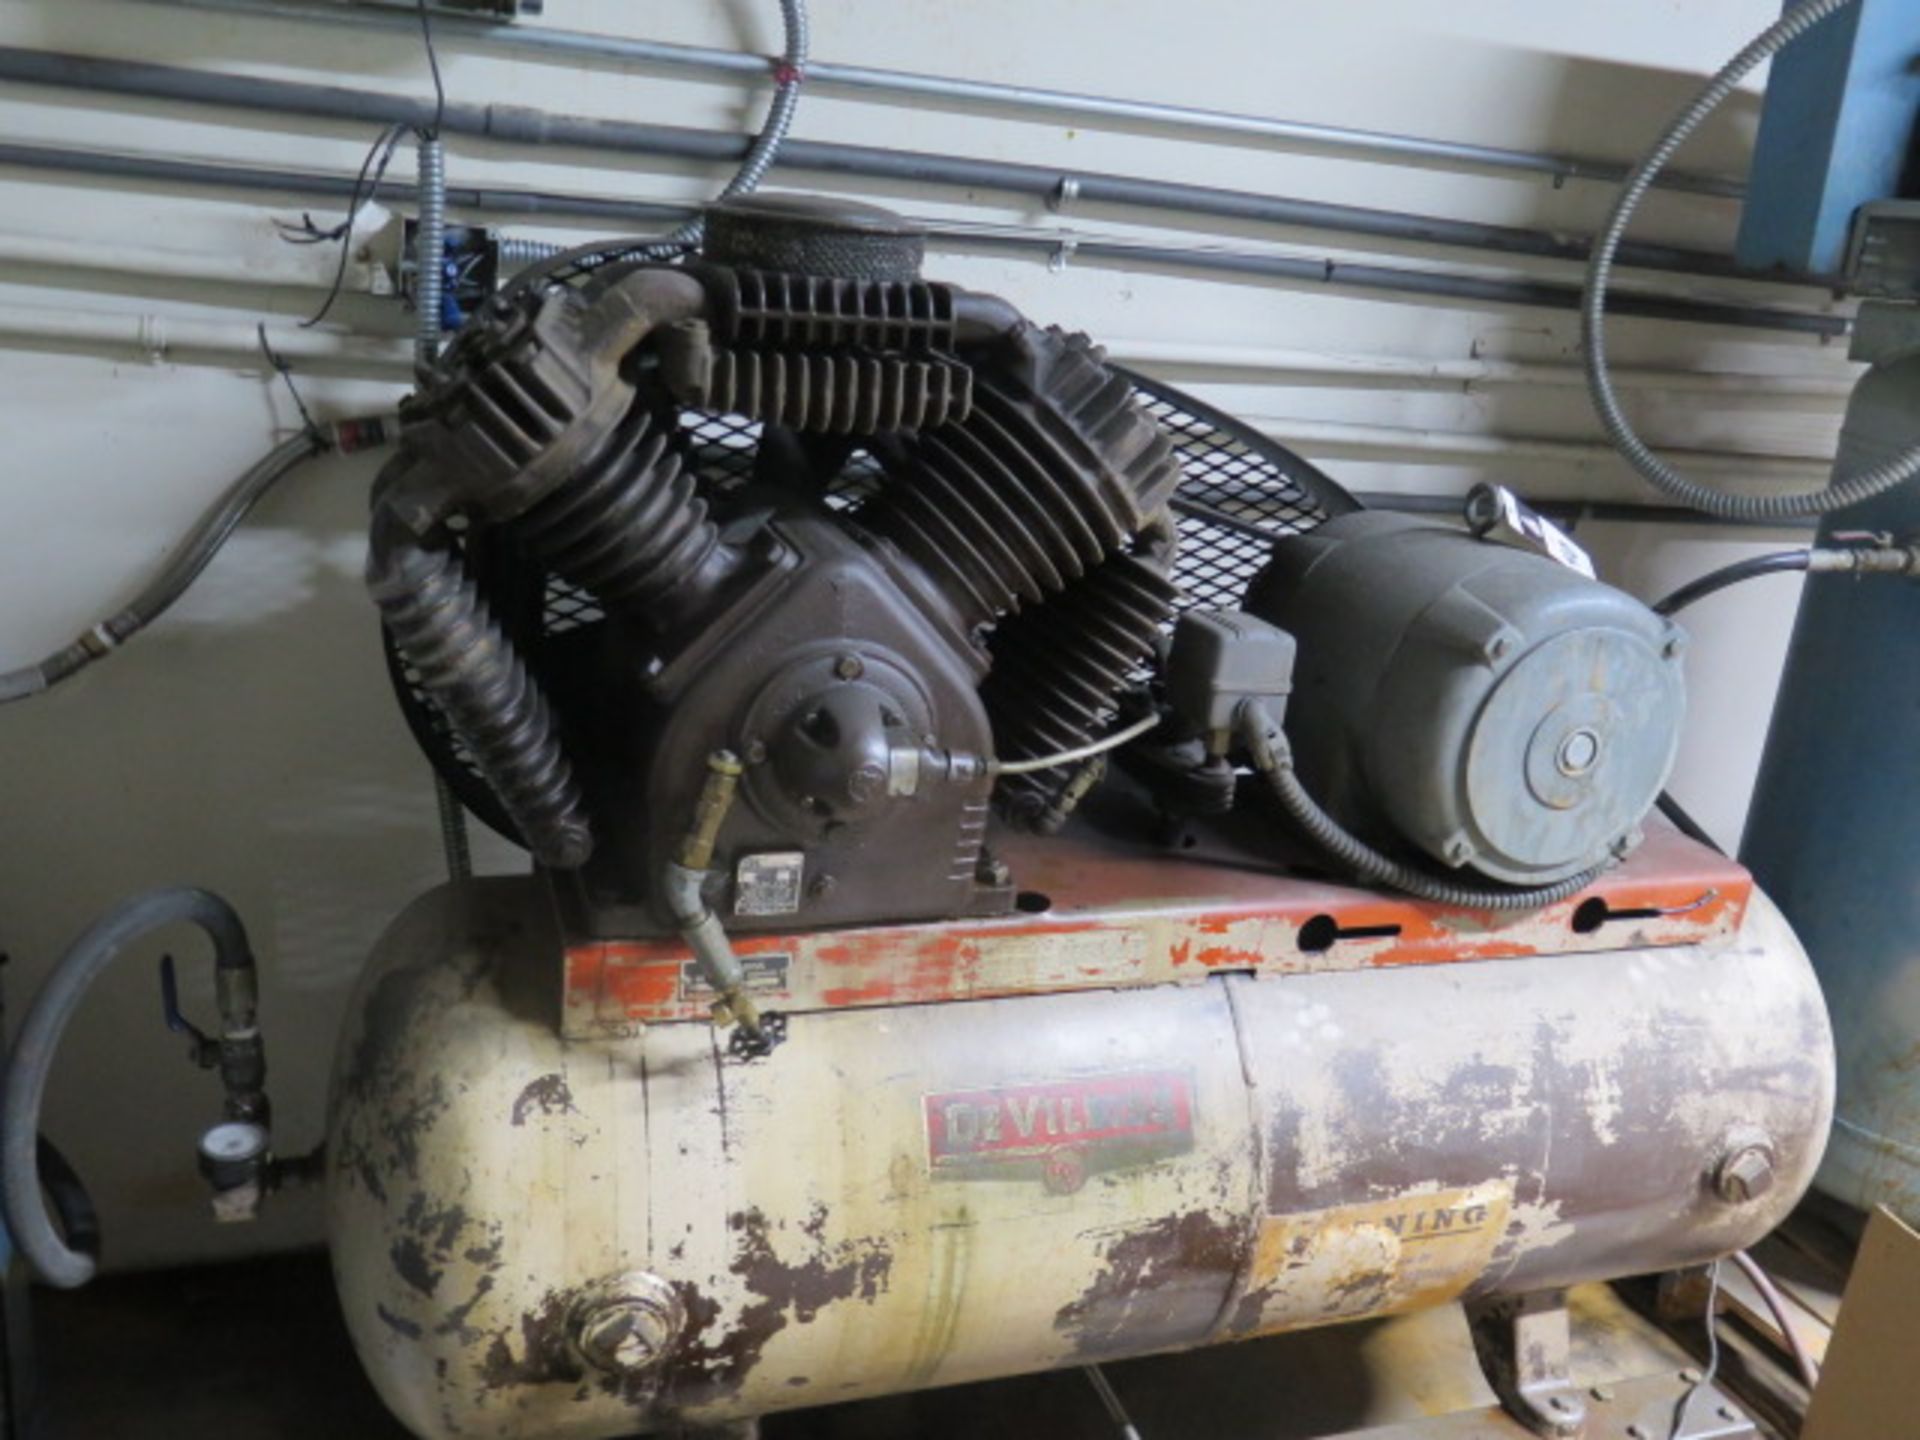 DeVilbiss 7.5Hp Horizontal Air Compressor w/ 3-Stage Pump, 80 Gallon Tank (CONDITION UNKNOWN) ( - Image 3 of 5